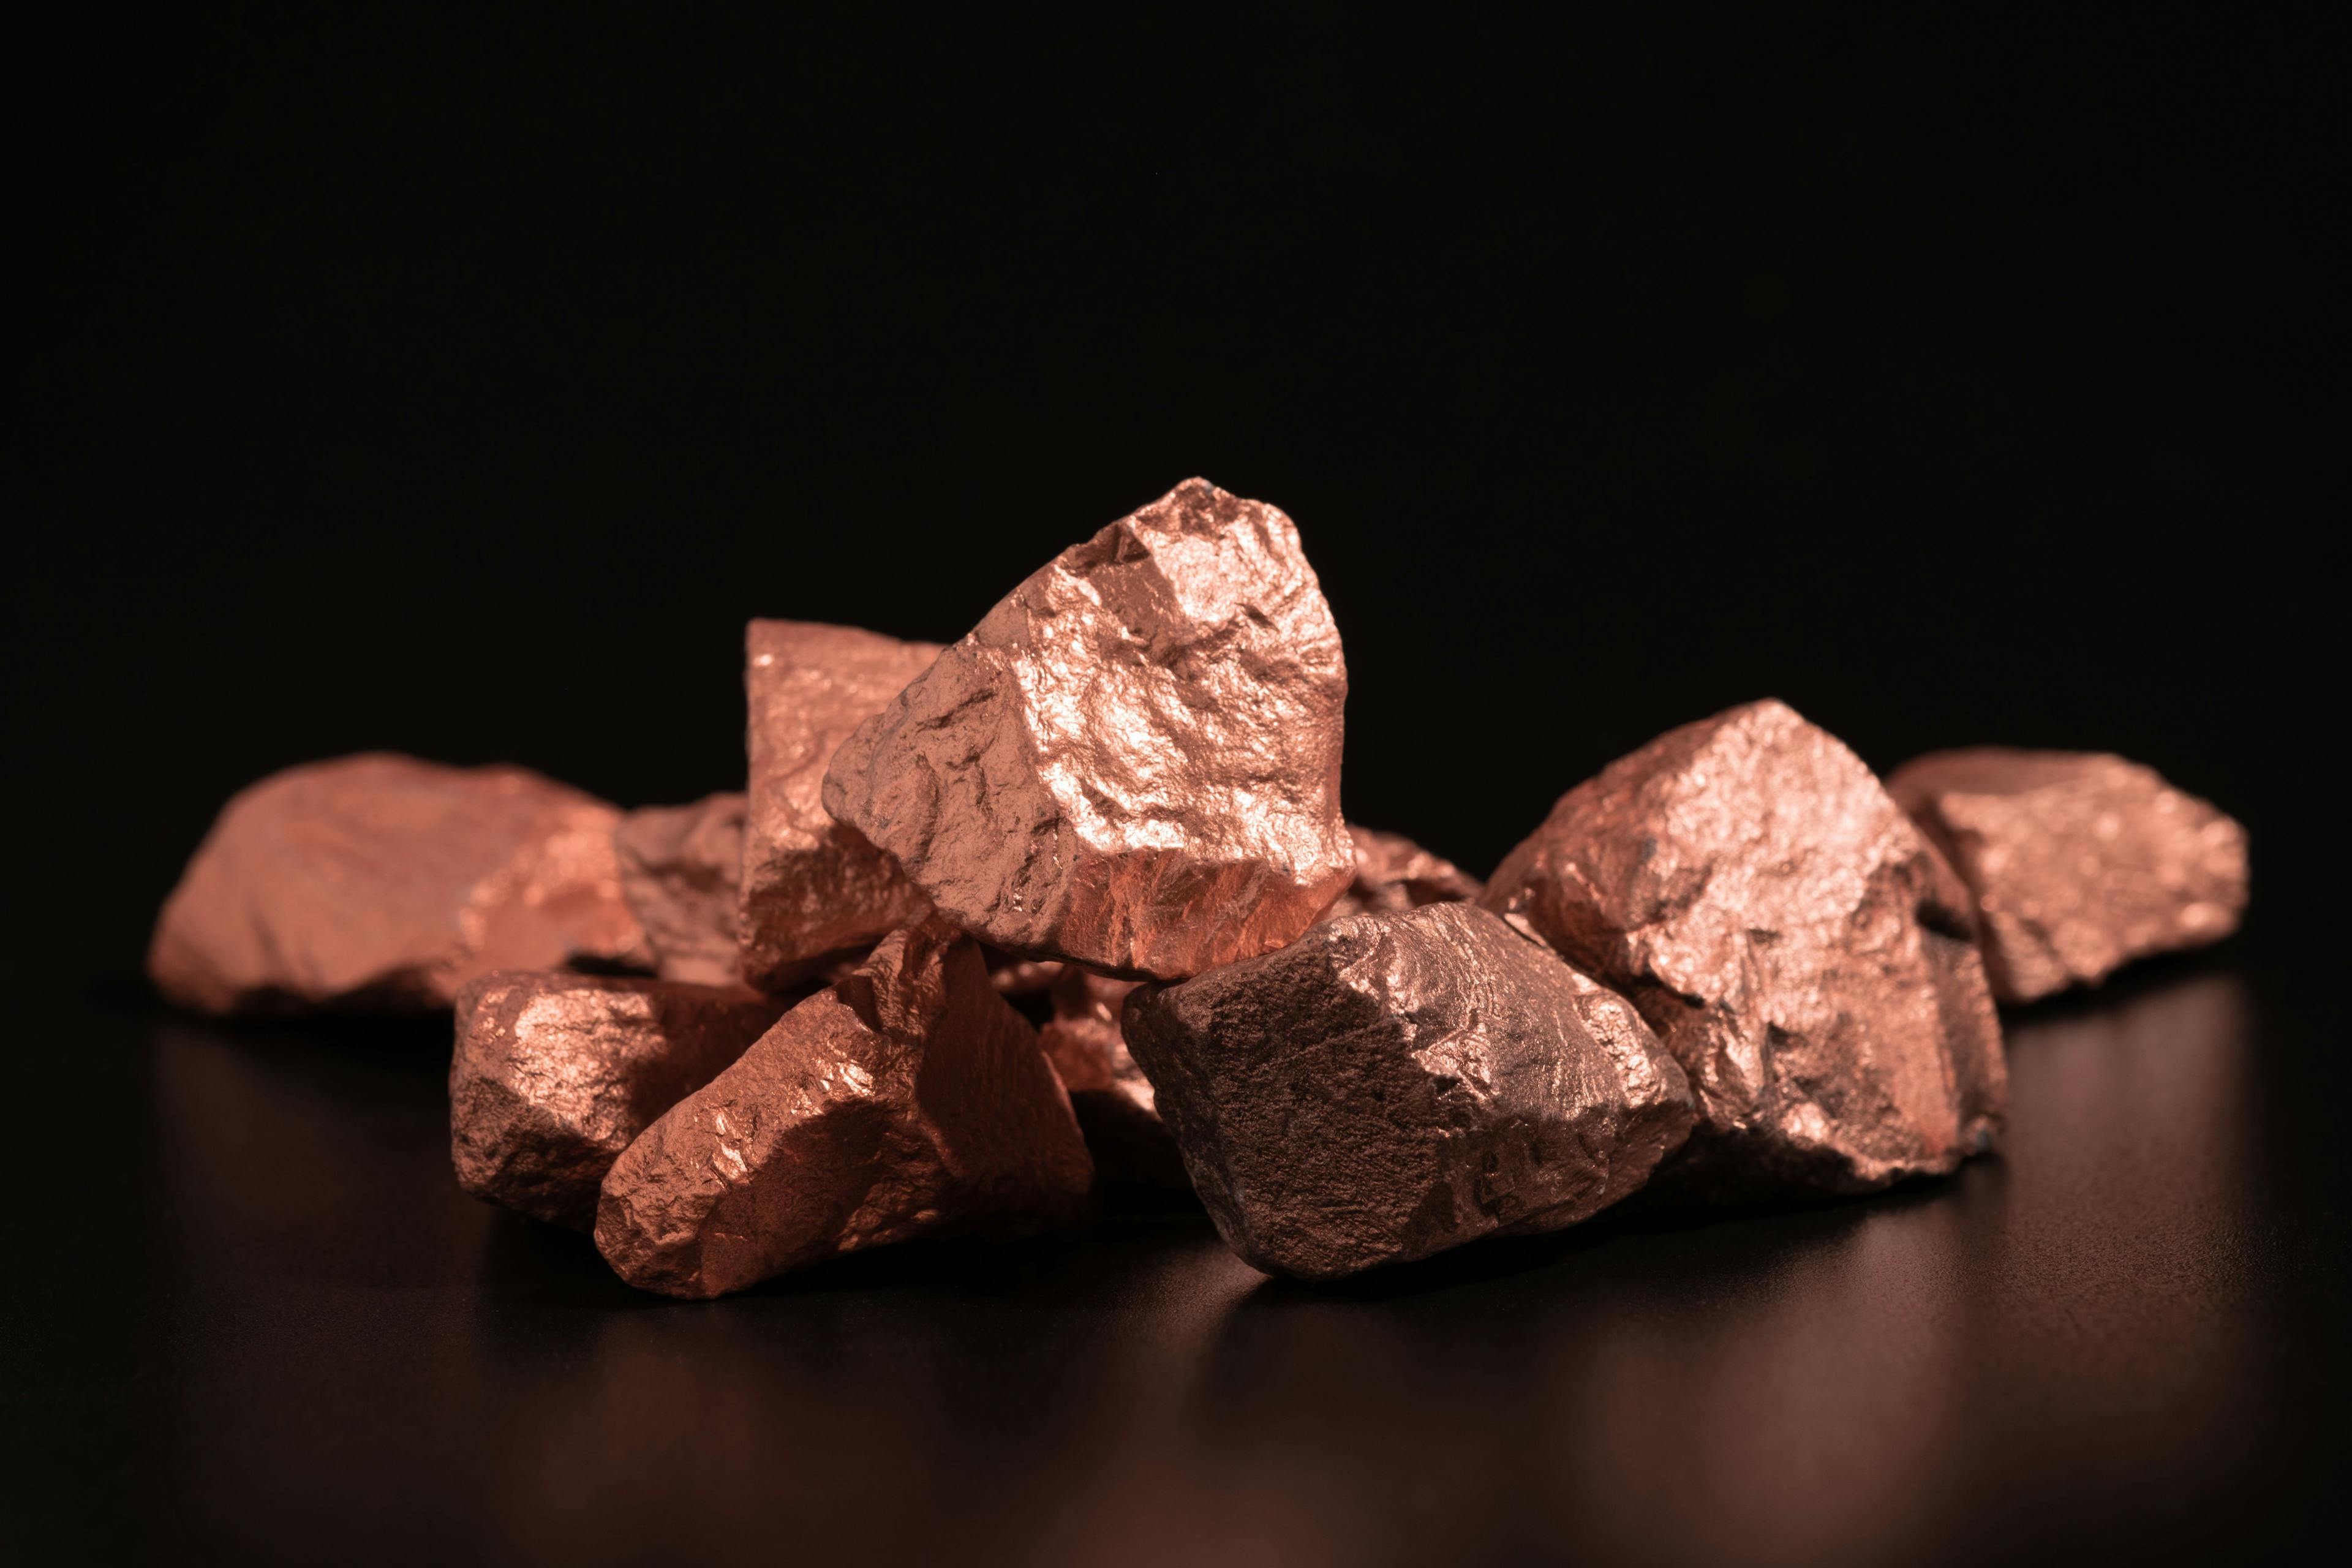 Ingots of pure copper or pink gold on a black background. | Image Credit: © Phawat - stock.adobe.com